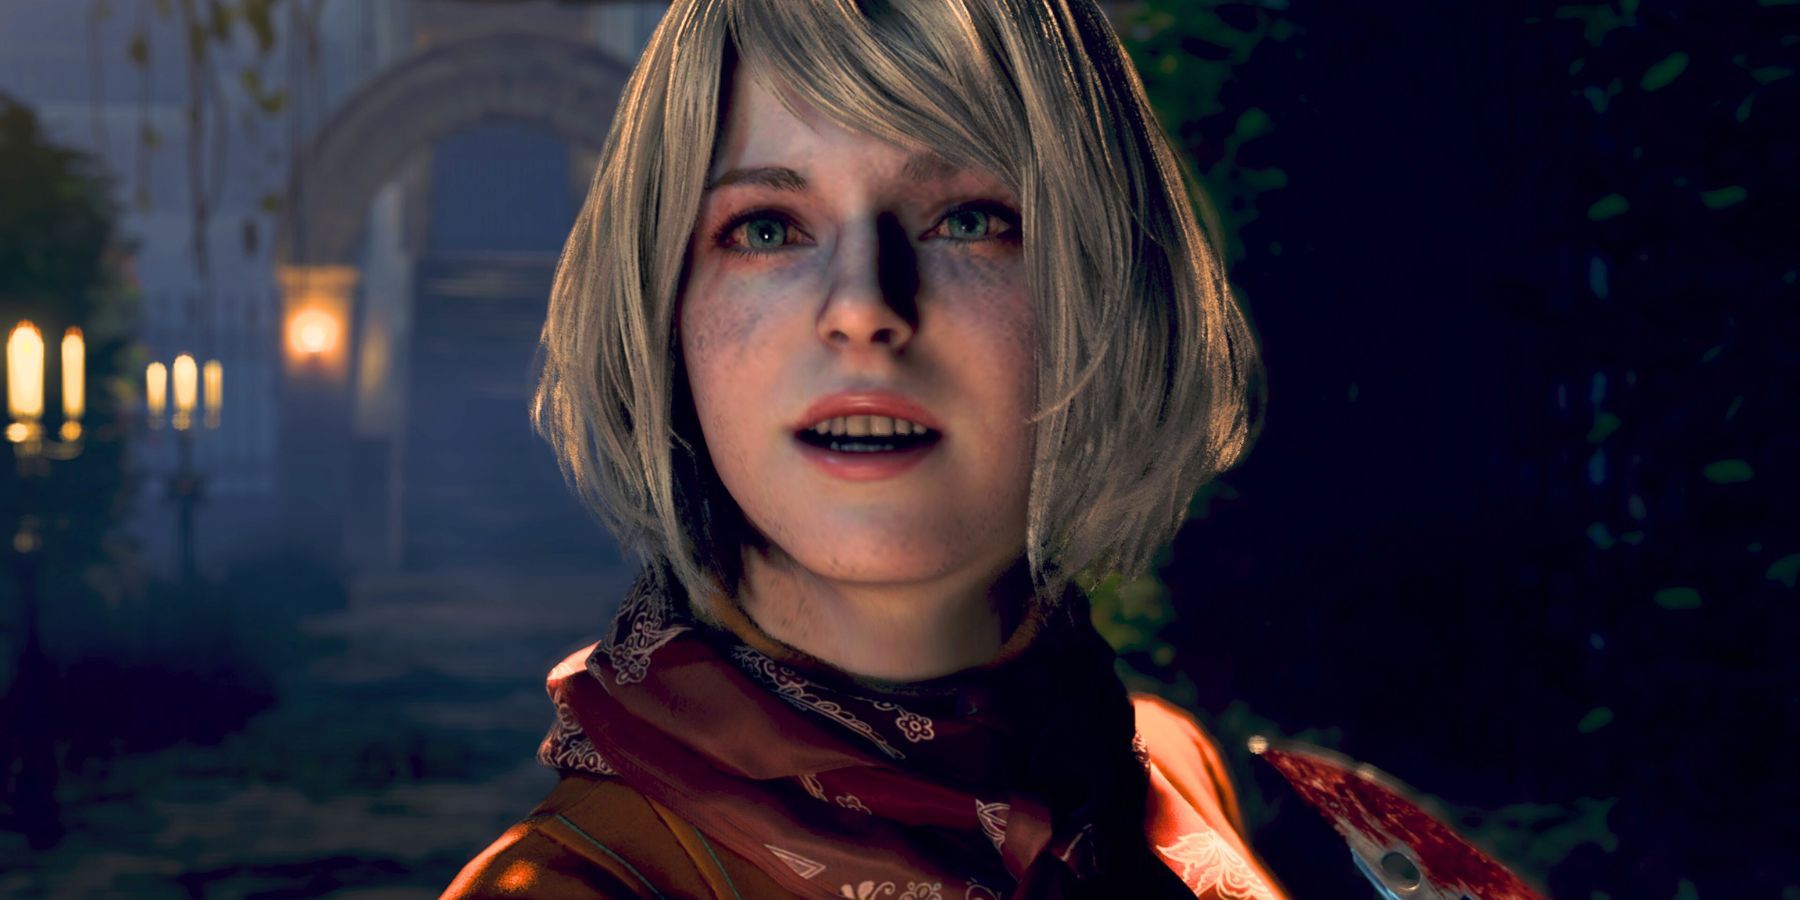 Who do you think will play Ashley in the Resident Evil 4 Remake? : r/ residentevil